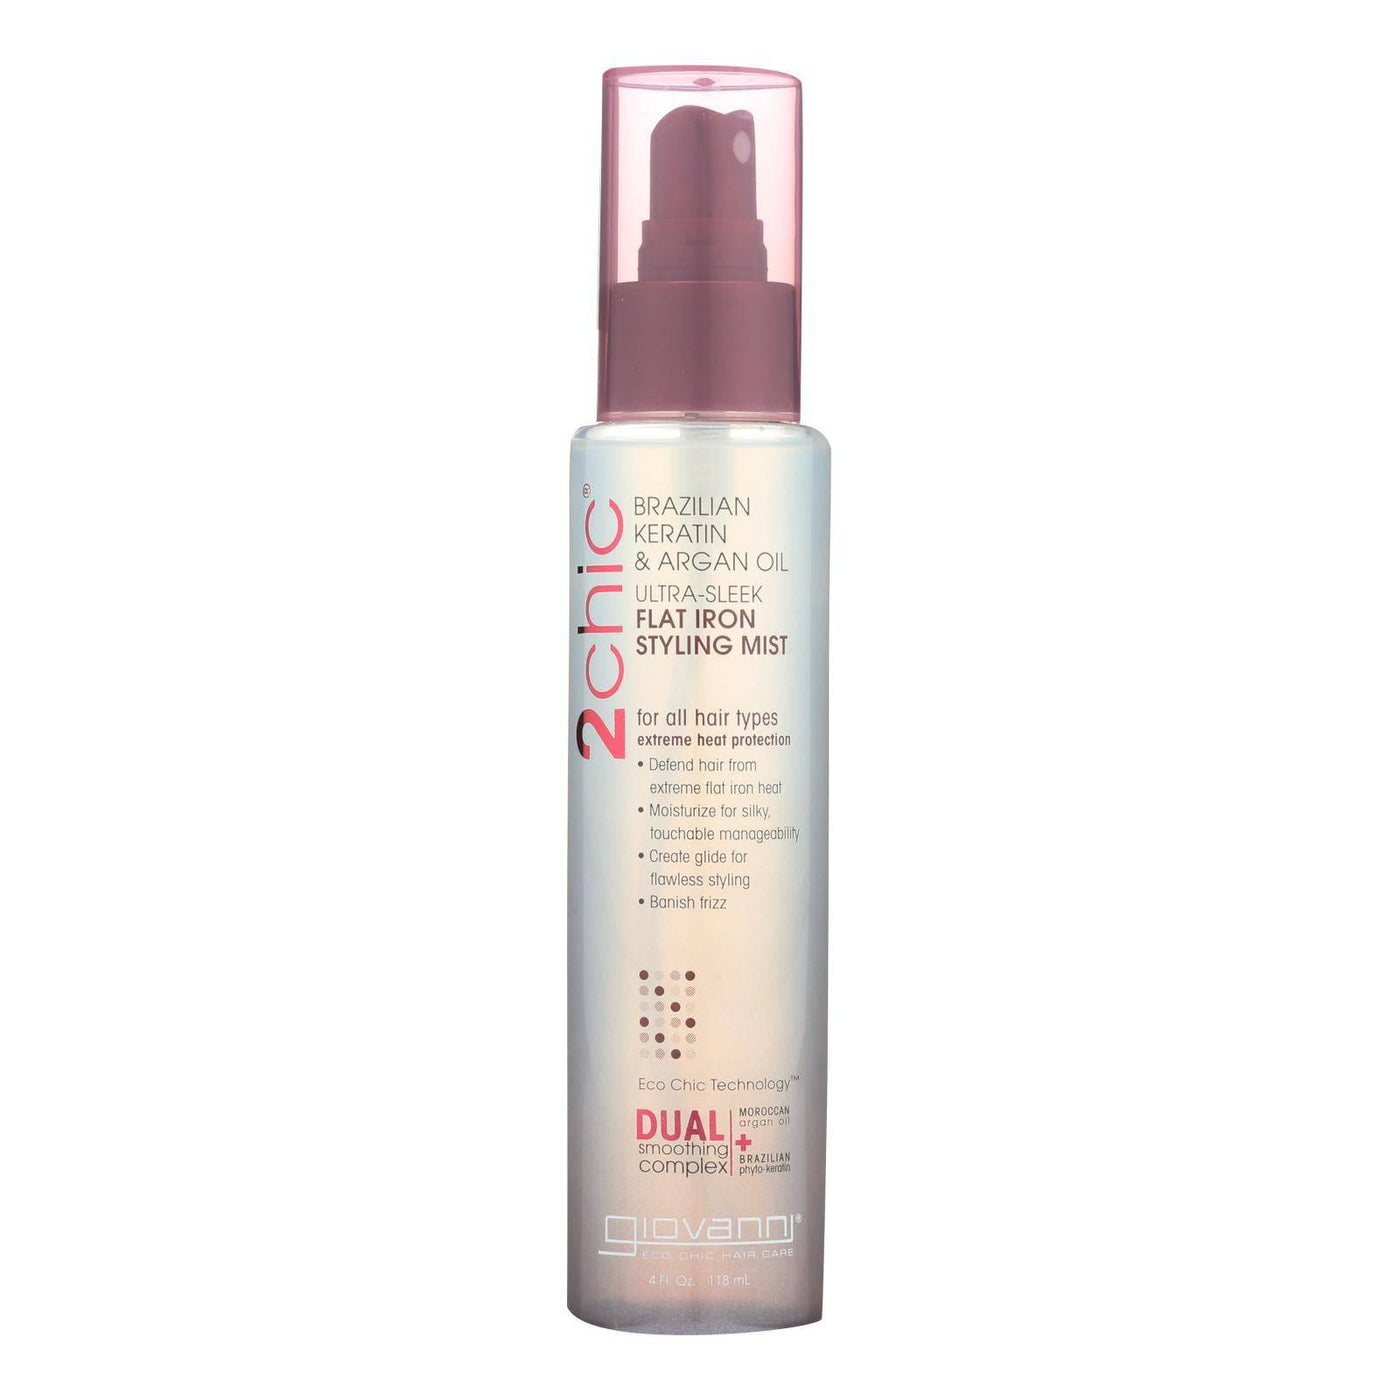 Giovanni 2chic Flat Iron Styling Mist With Brazilian Keratin And Argan Oil - 4 Fl Oz | OnlyNaturals.us